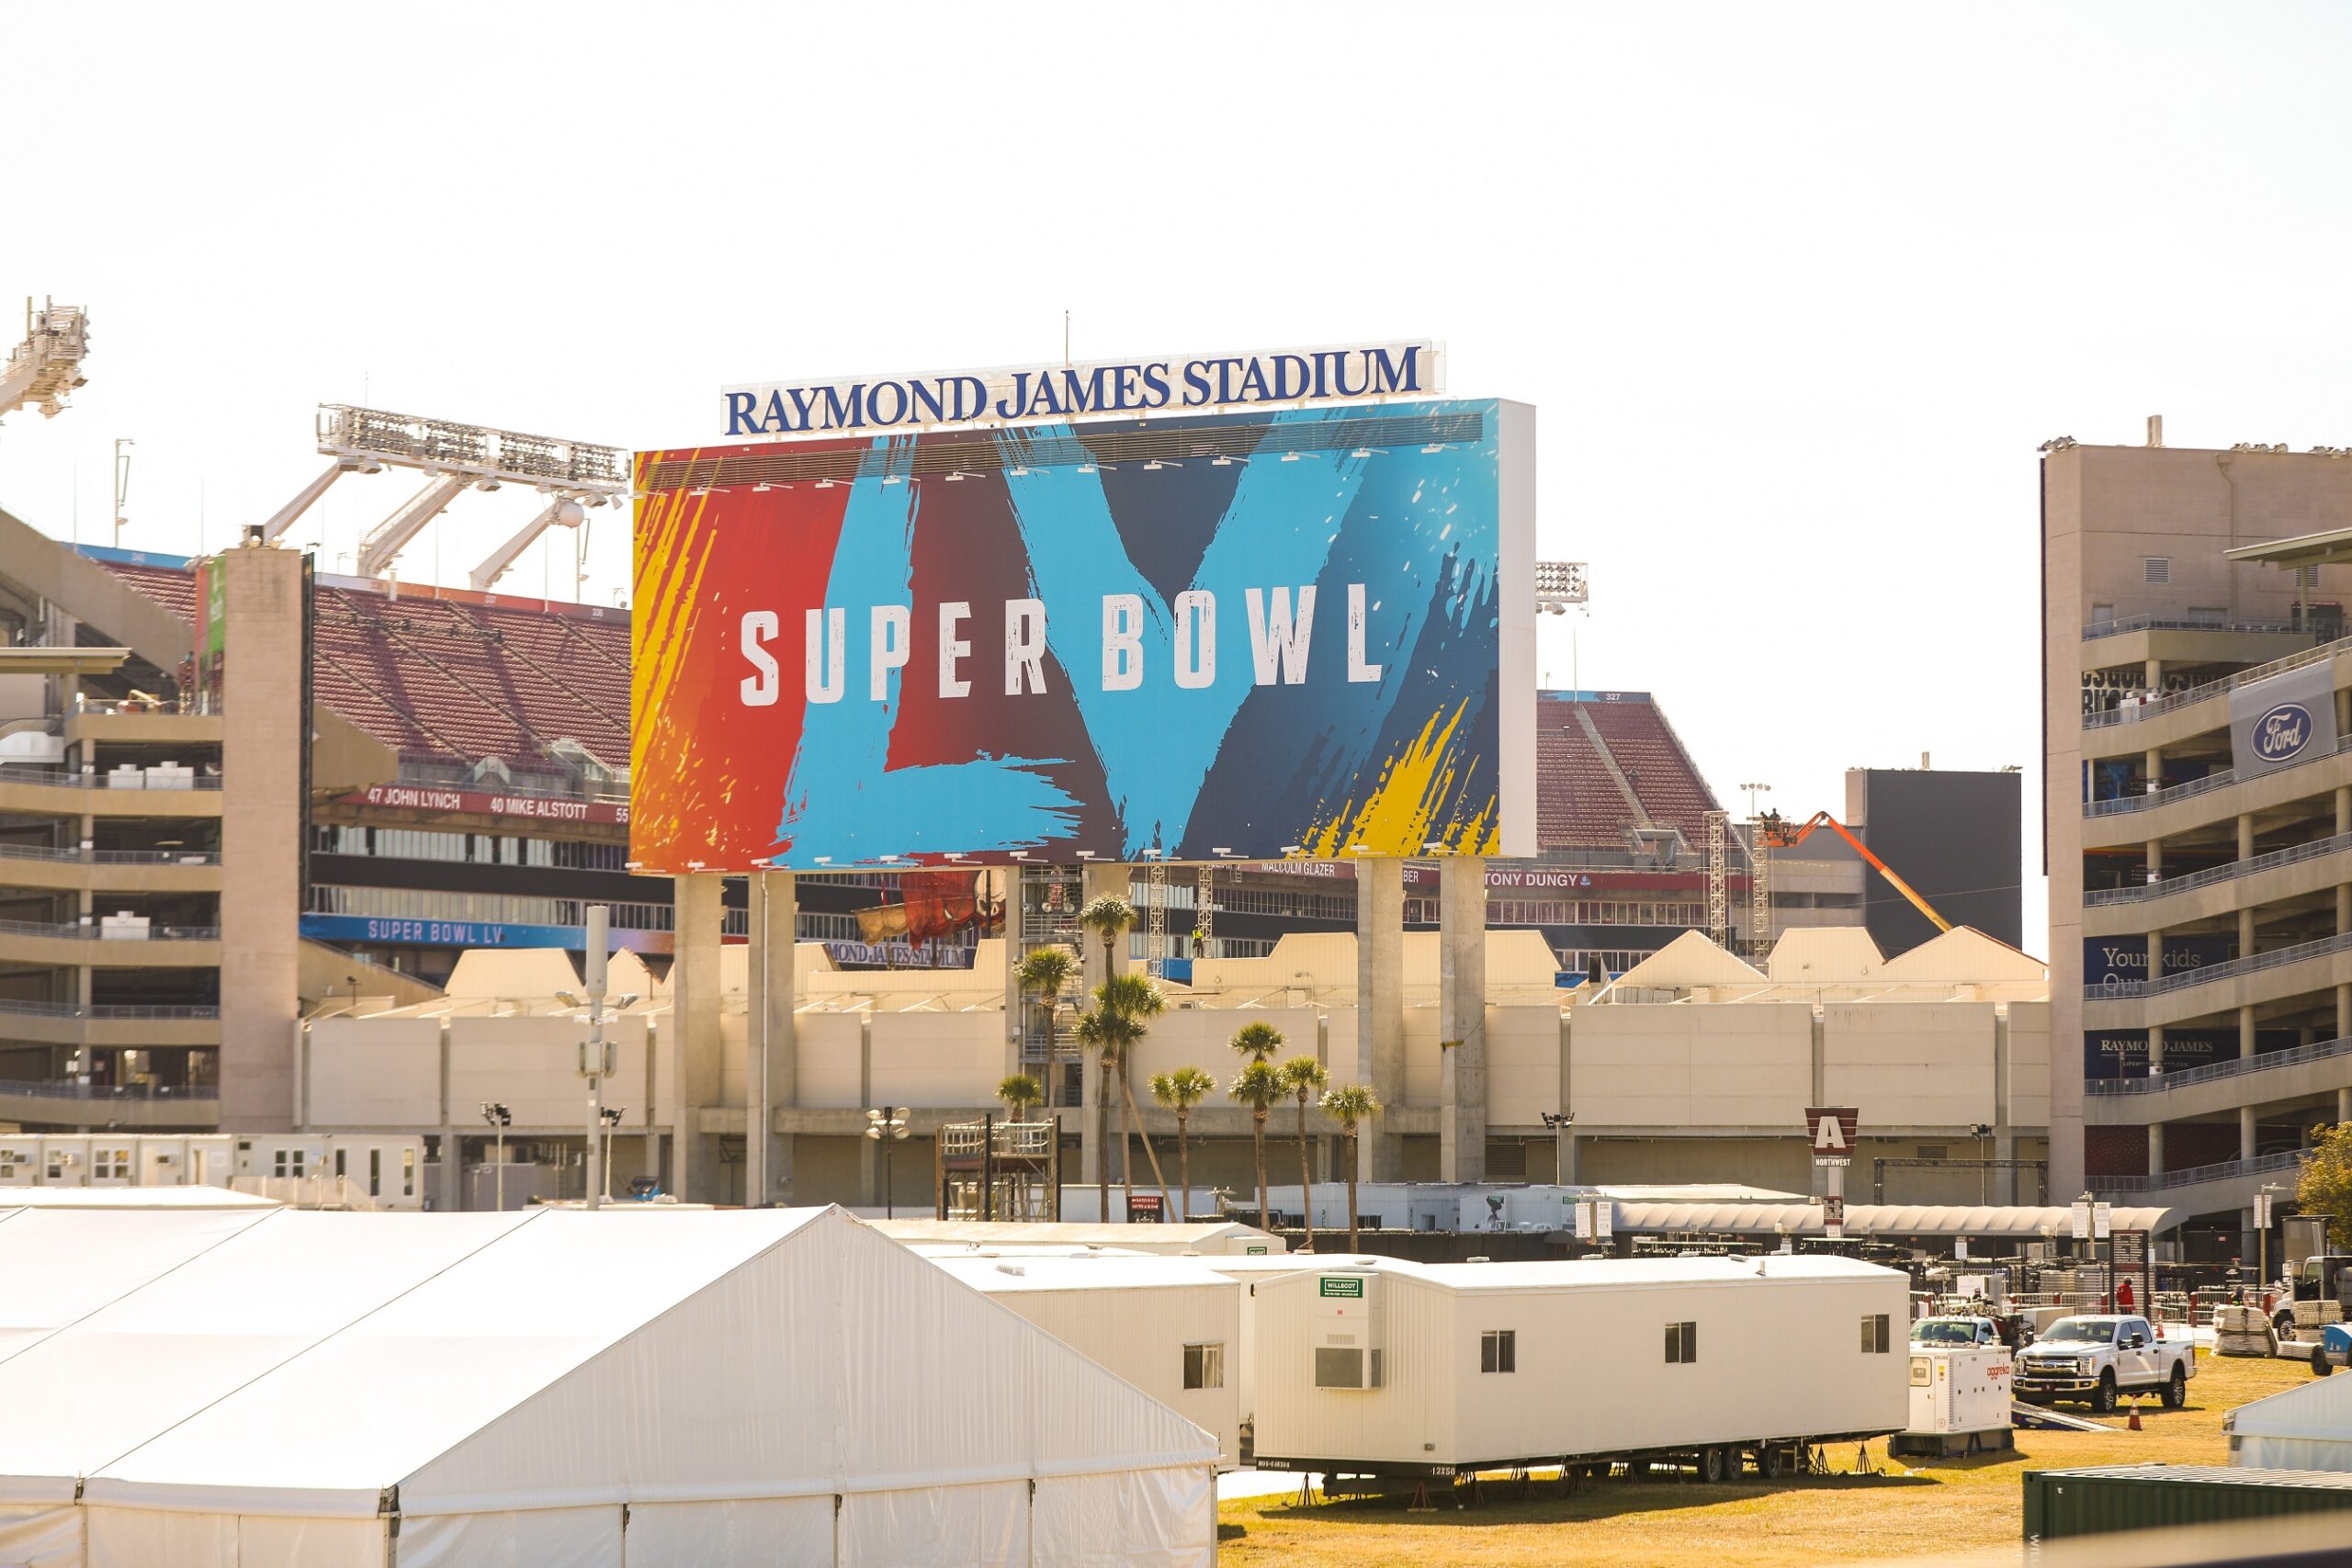 Industrial Print Helps Fill the Stadium at Super Bowl LV